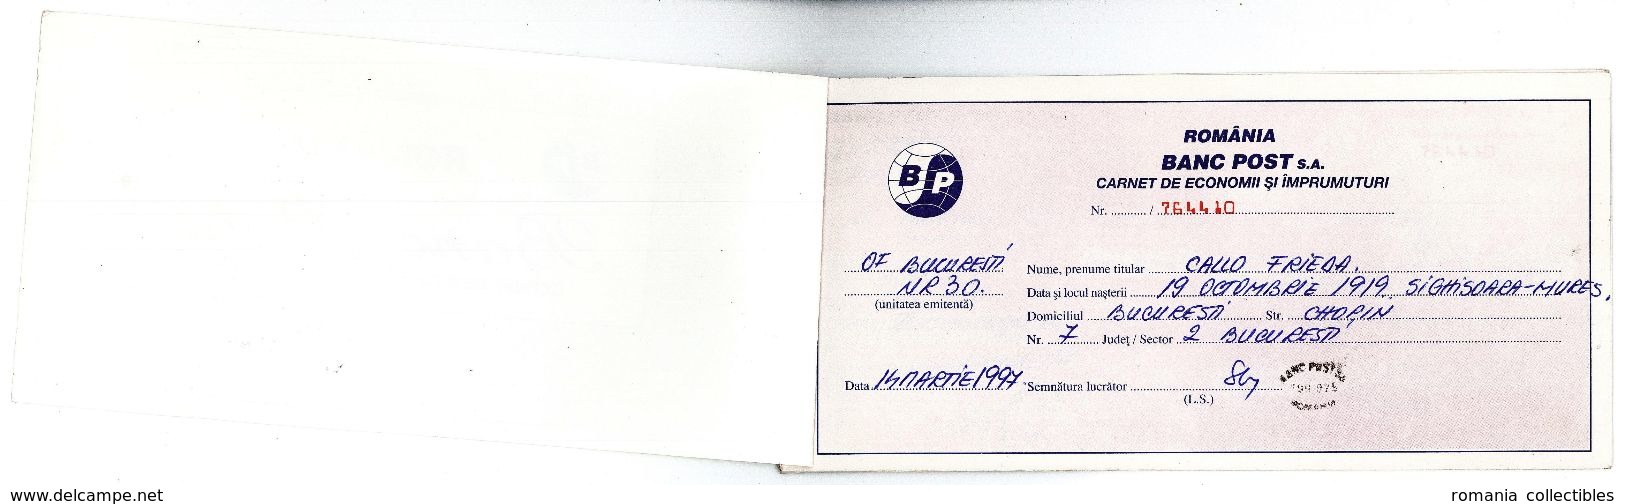 Romania, 1997, Vintage Bank Checkbook / Term Savings Book - Banc Post - Cheques & Traveler's Cheques